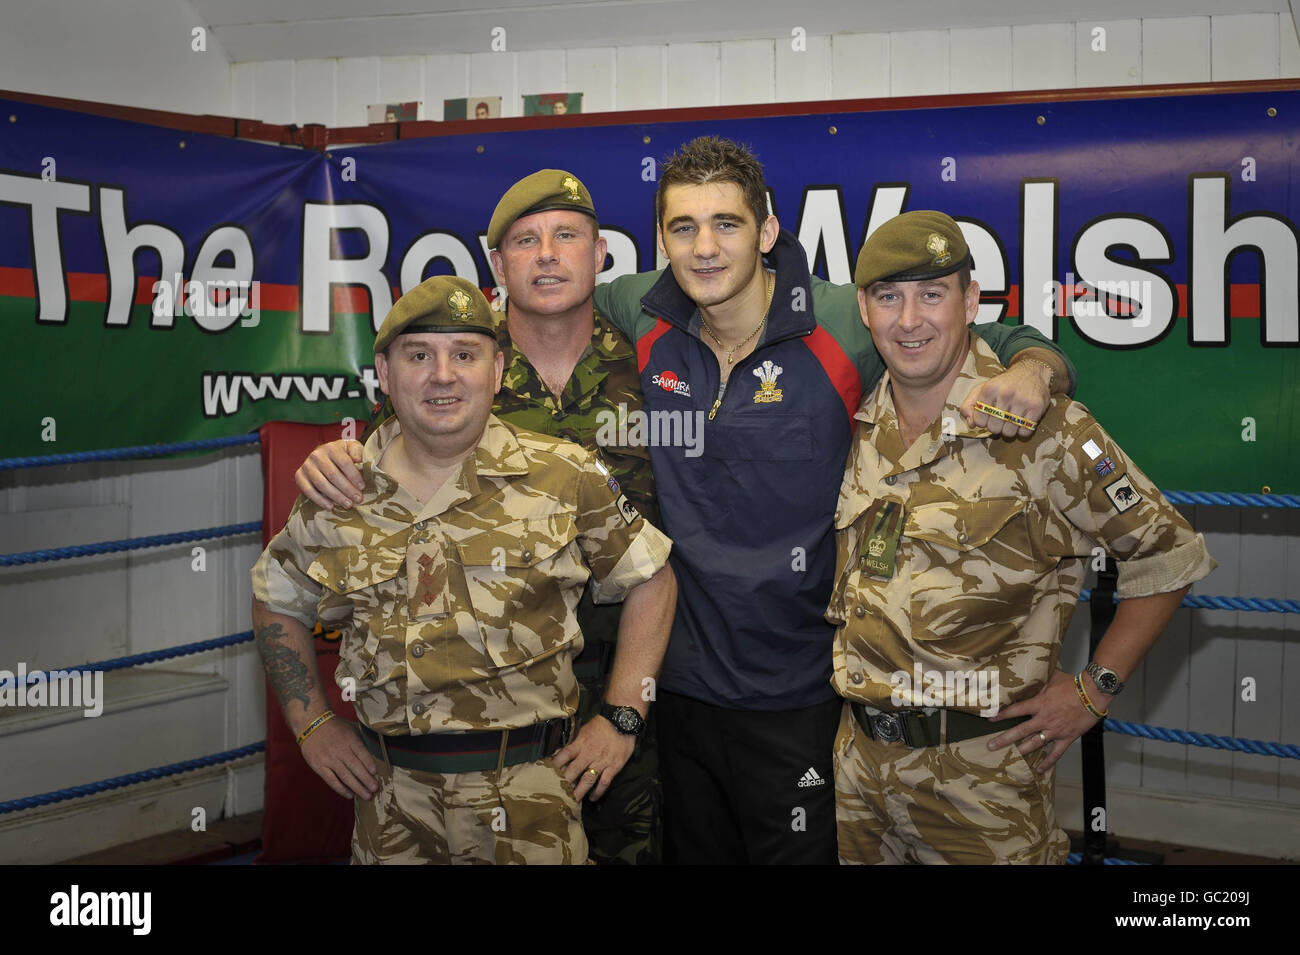 British and Commonwealth Light-Heavyweight Champion Nathan Cleverly, who defends his commonwealth title at Belfast's Odyssey Arena on October 9, is pictured with soldiers from the Royal Welsh Regiment at his gym in Bargoed, Wales, as Nathan shows his support for The Royal Welsh and the great job they are doing by fully endorsing 'The Soldiers Charity' and wearing the 'Support the Royal Welsh in Afghanistan' wrist band. Stock Photo